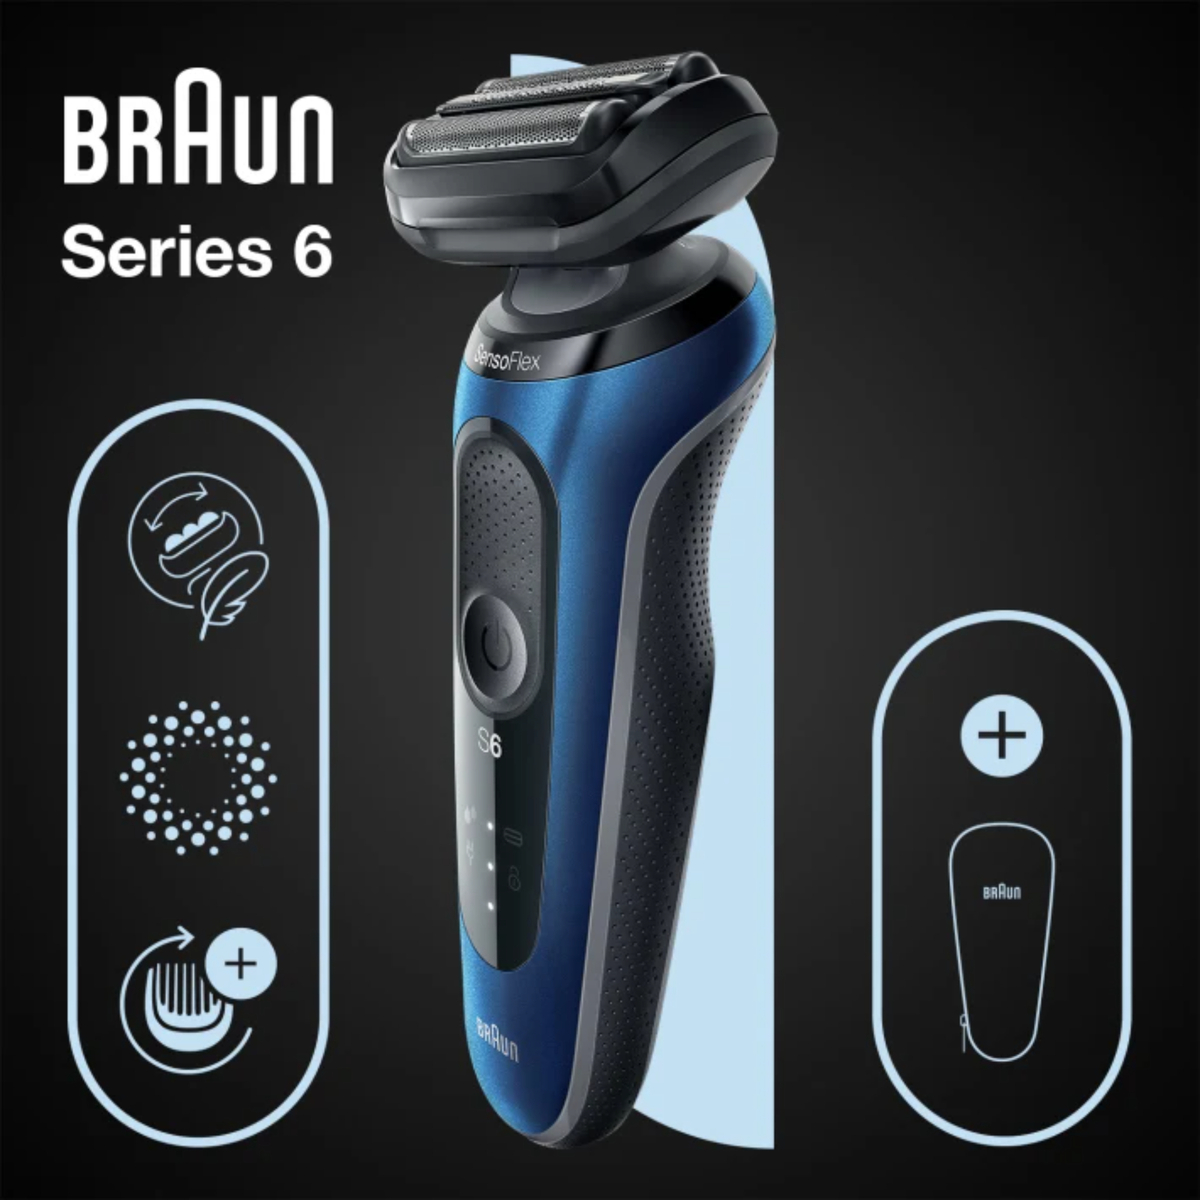 Braun Wet and Dry Shaver With Travel Case, Blue, 61-B1000s